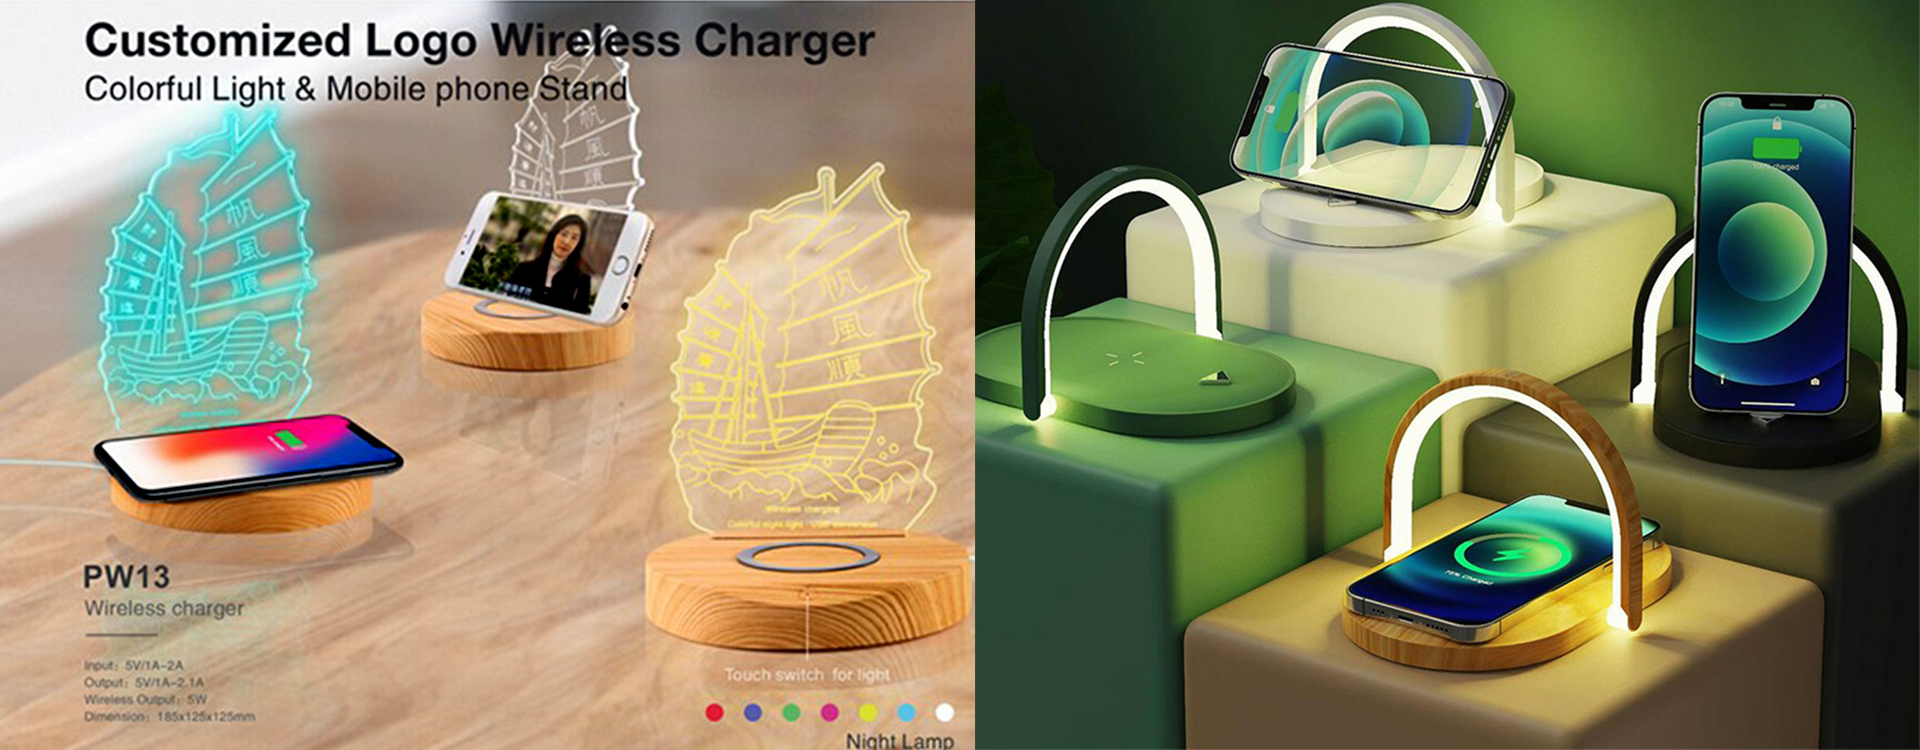 Wireless Charger promotional products for small business